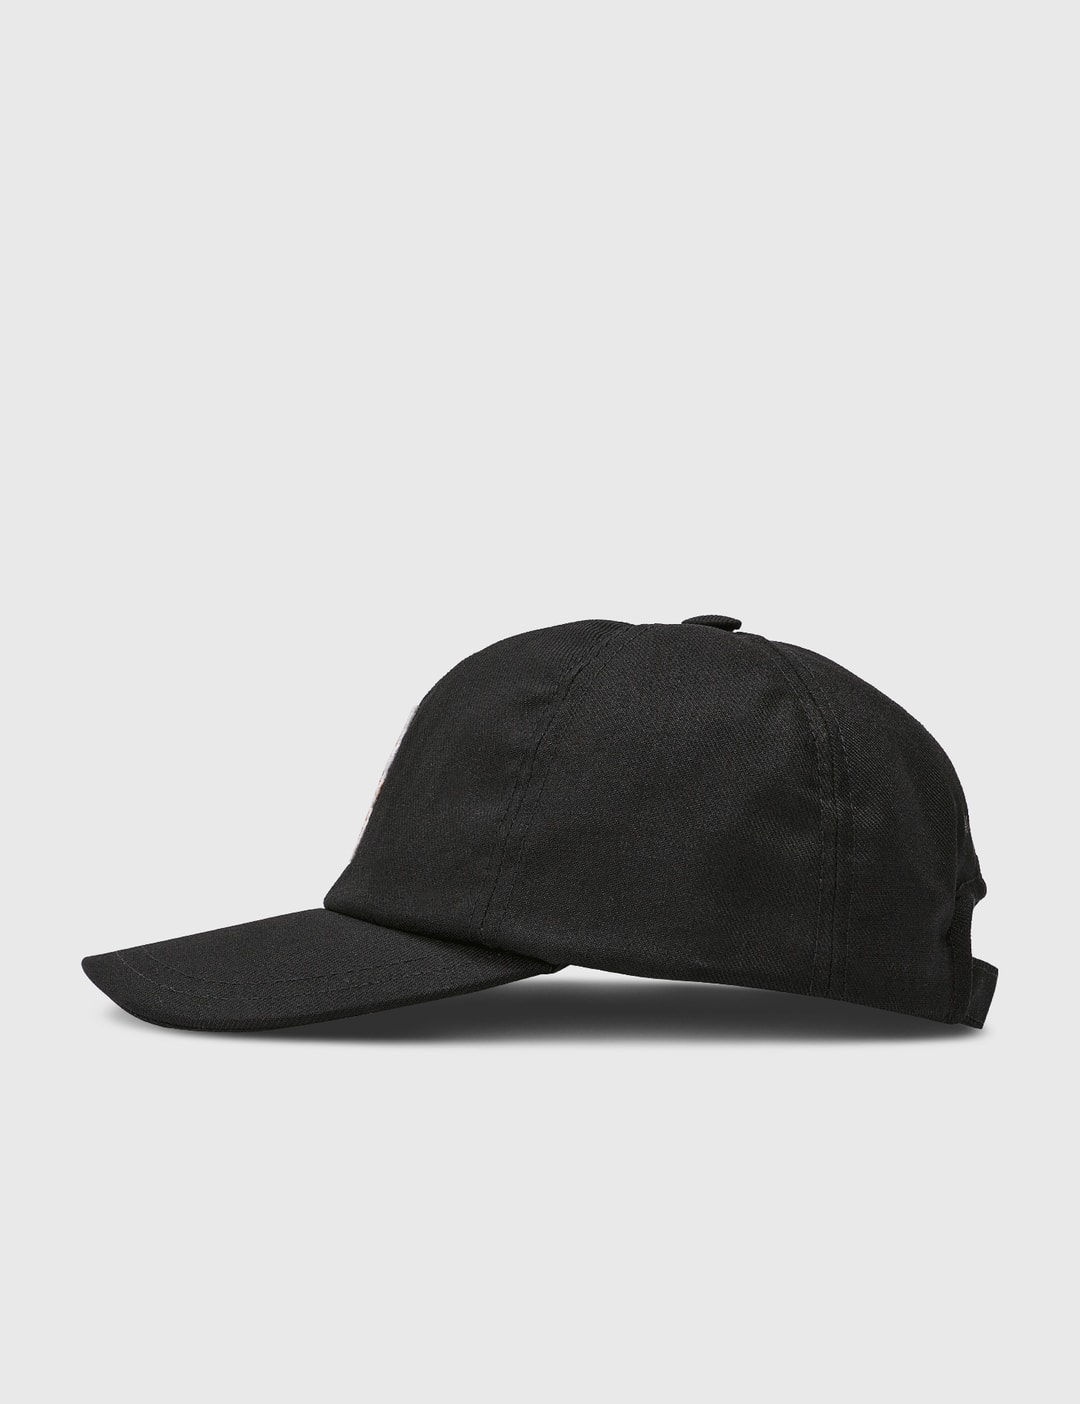 Maison Kitsuné - All-right Fox Cap | HBX - Globally Curated Fashion and ...